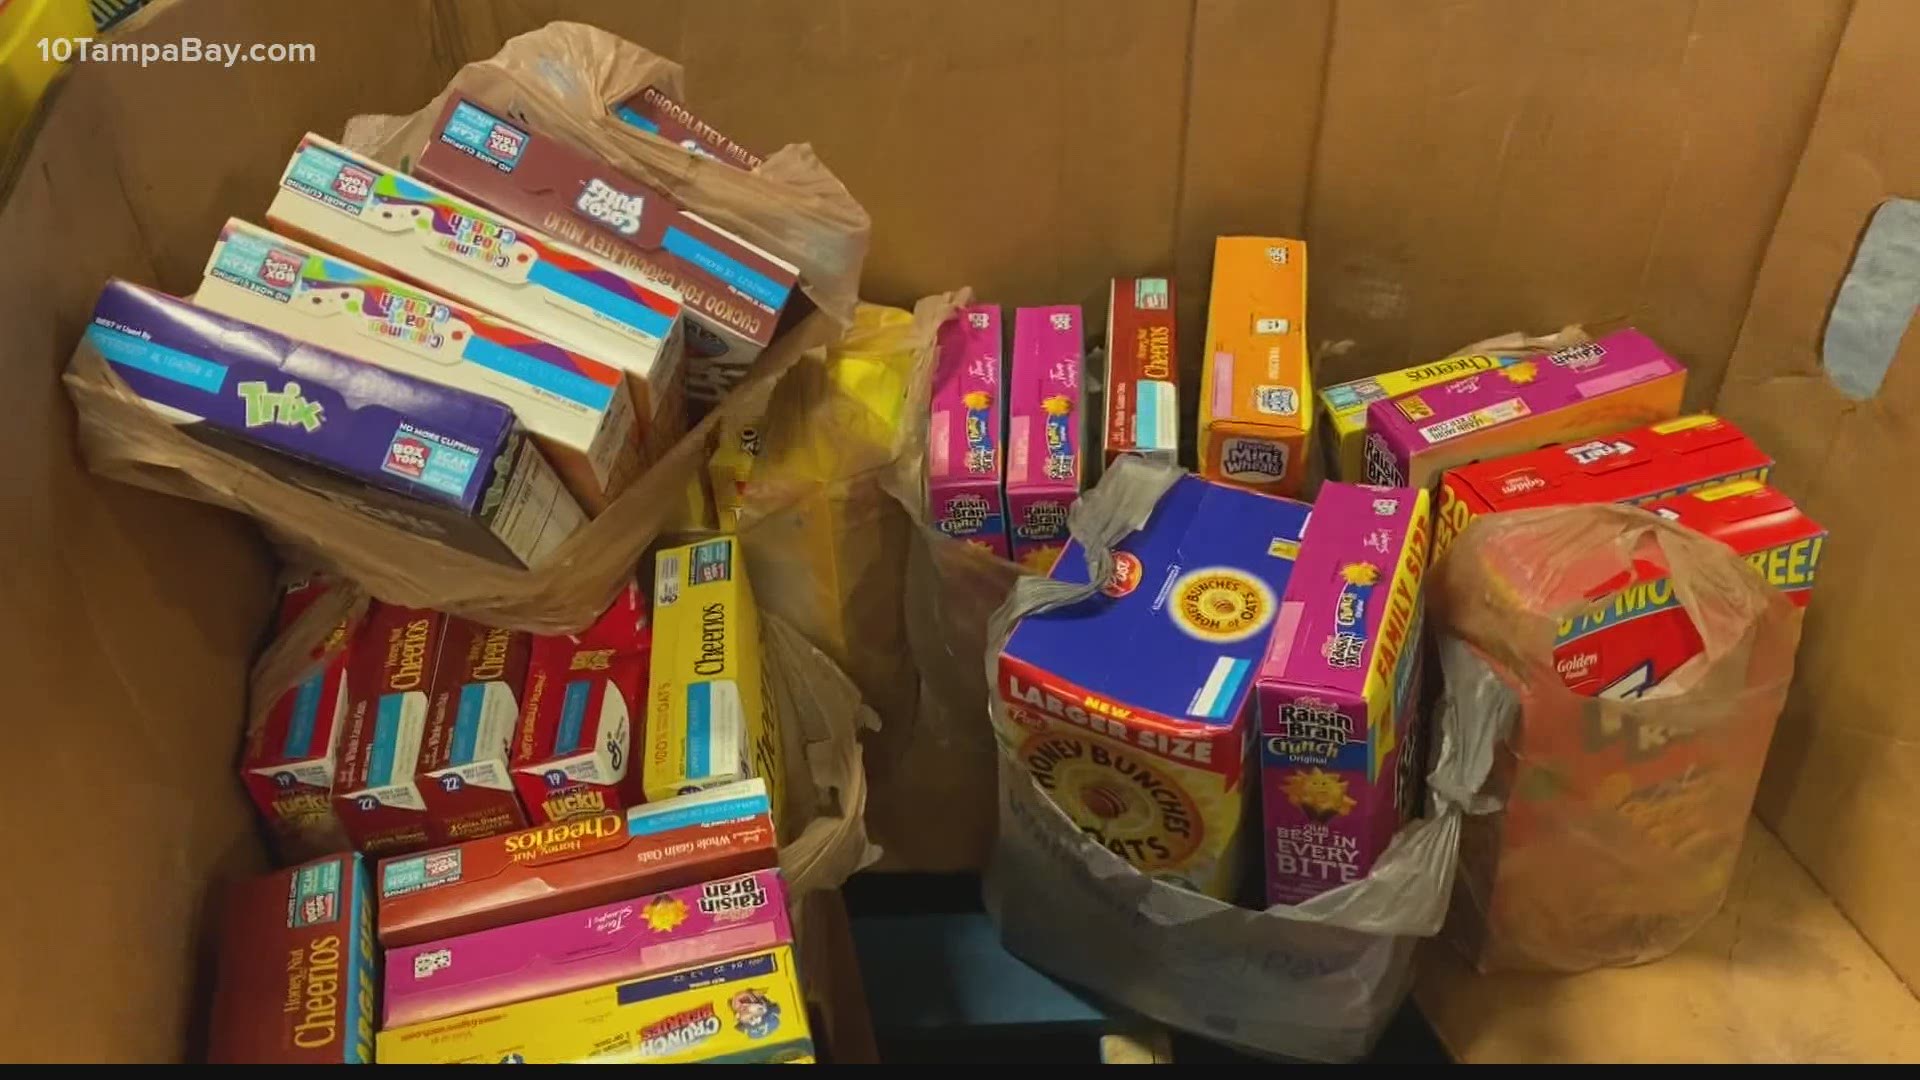 Local organizations still on the frontlines helping families in need as food insecurity increase